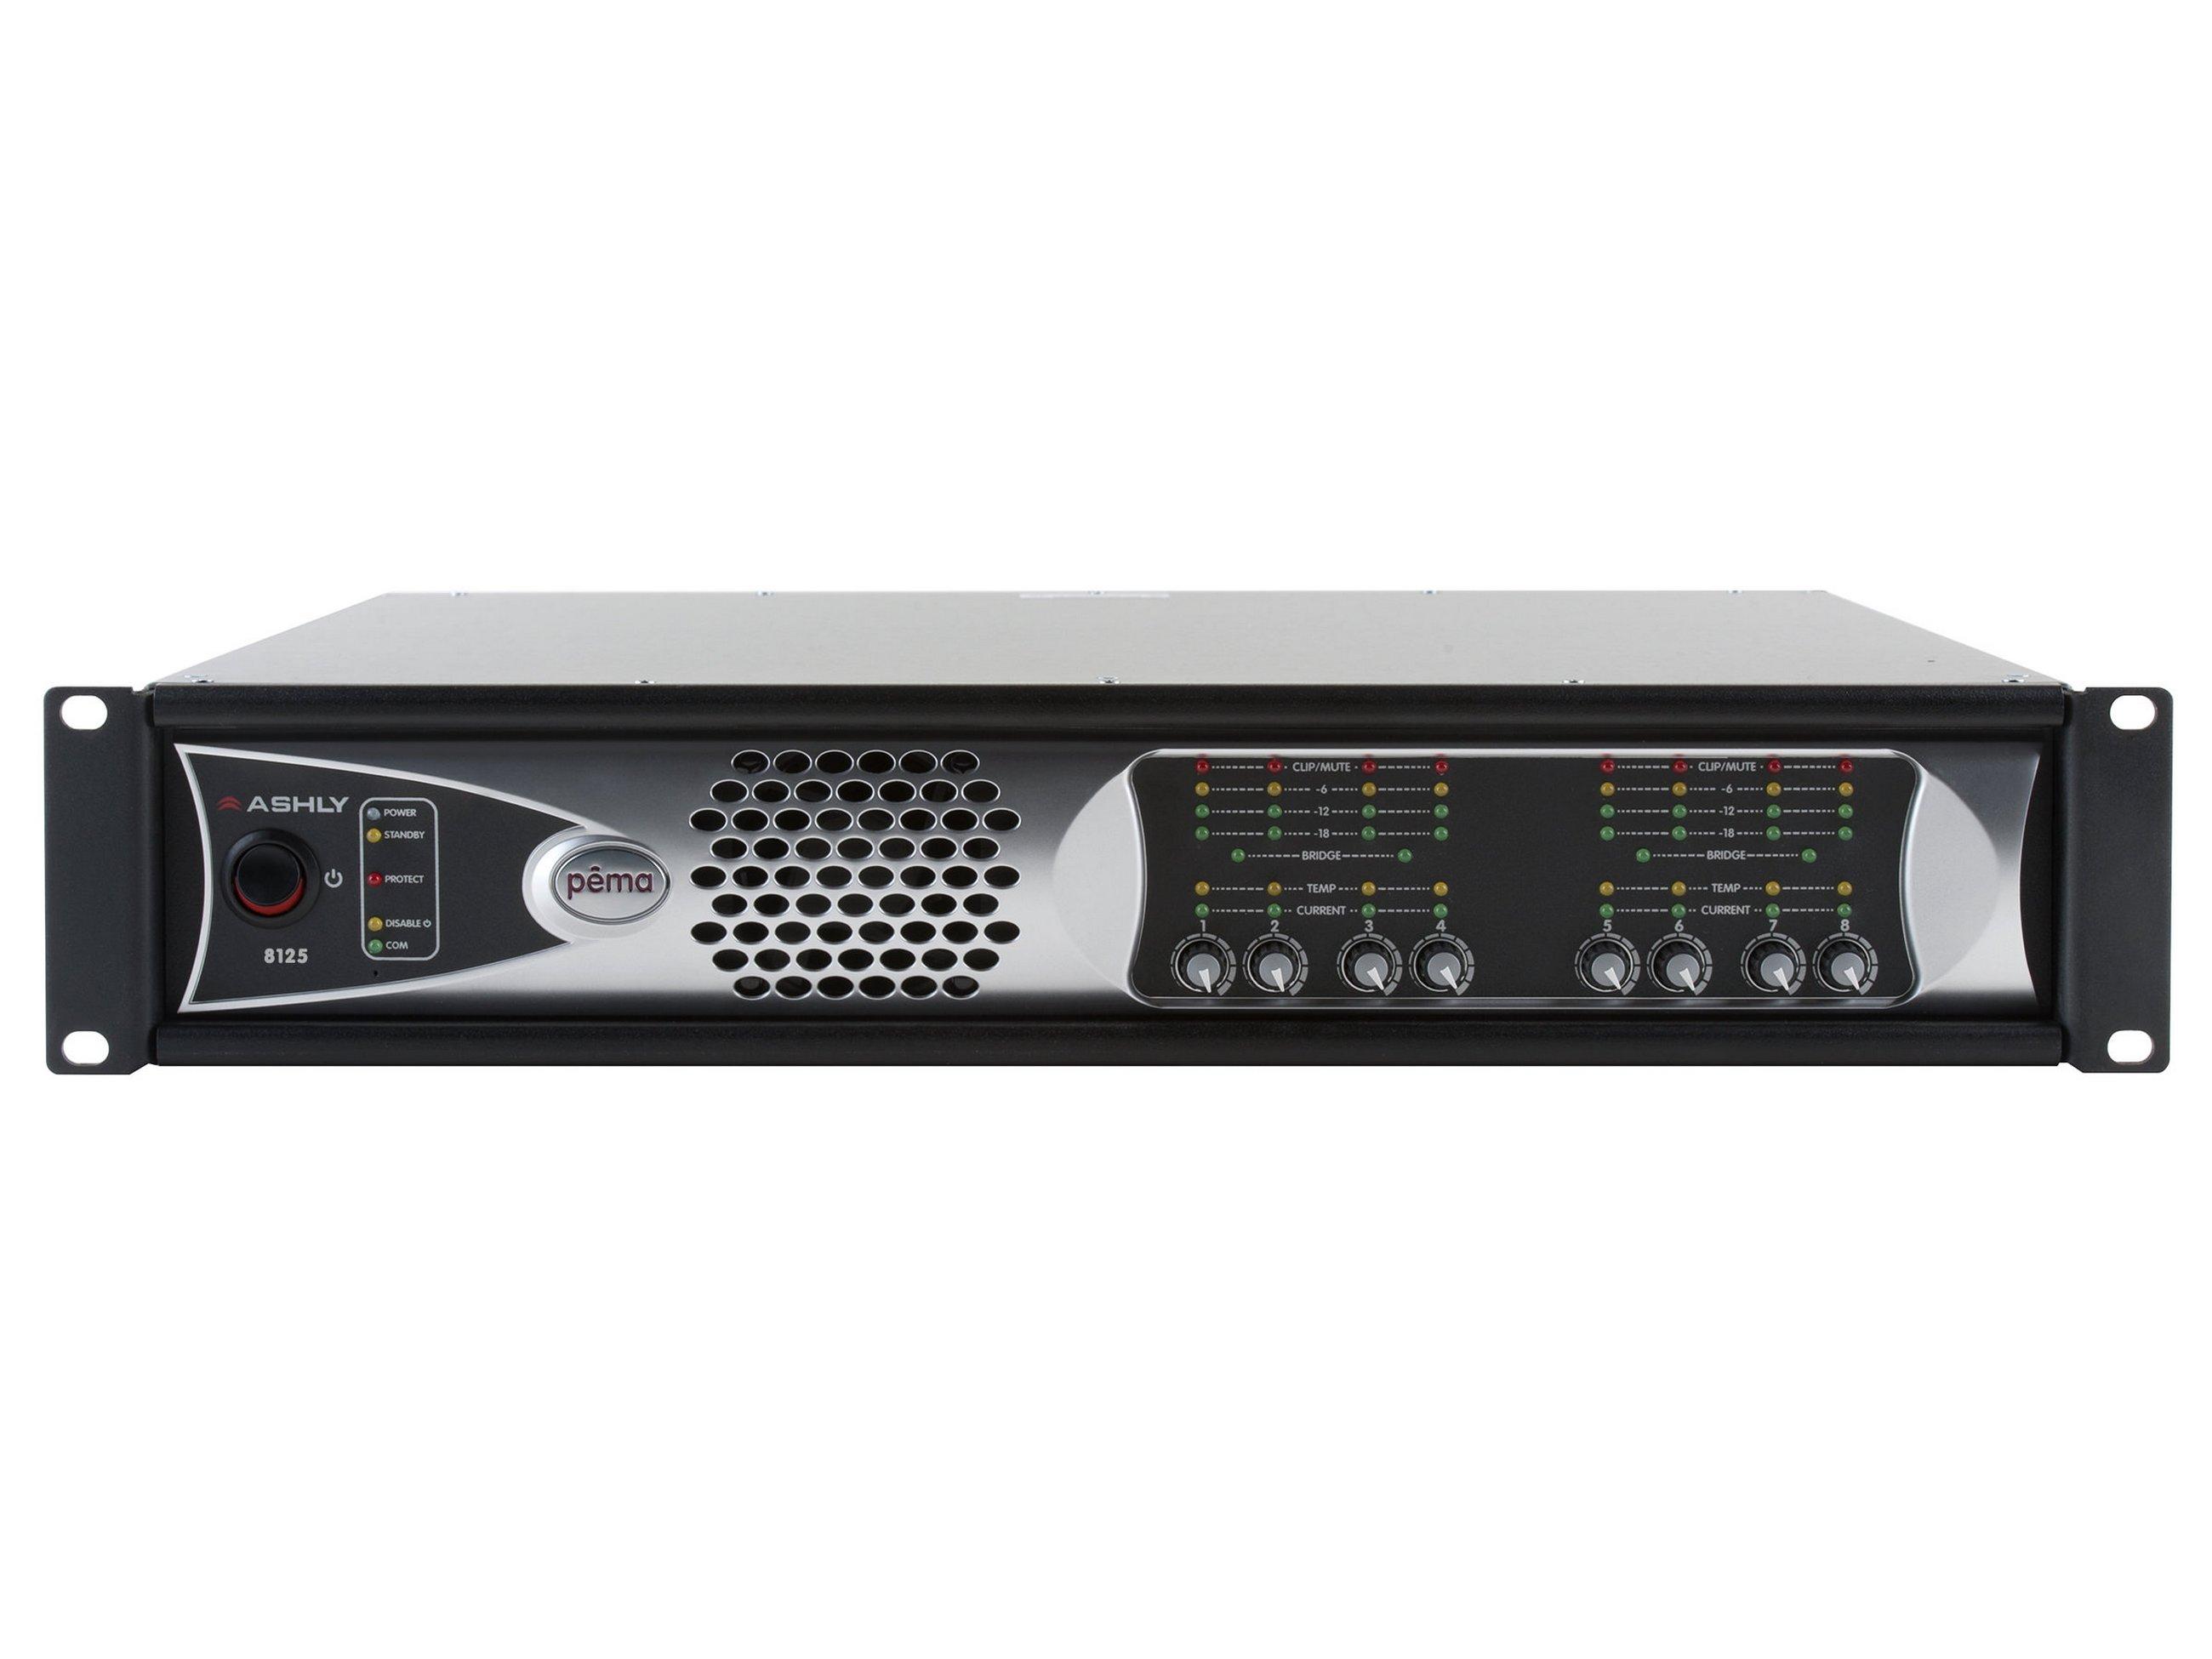 pema 8125d 8x 125W/4 Ohms and 25V Dante Network Power Amp with 8x8 DSP Processor by Ashly